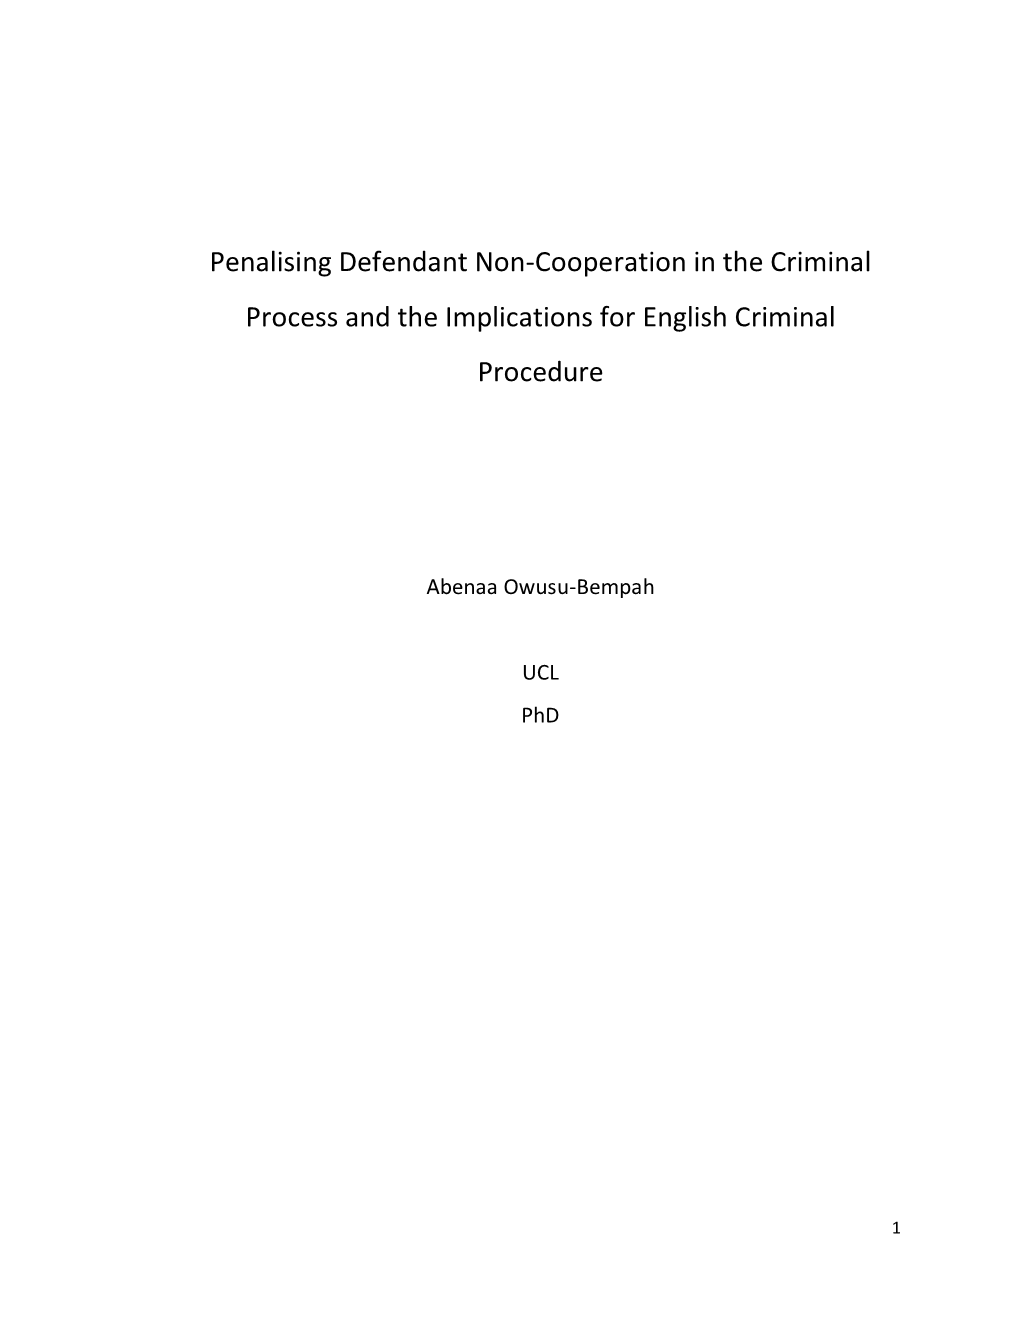 Penalising Defendant Non-Cooperation in the Criminal Process and the Implications for English Criminal Procedure